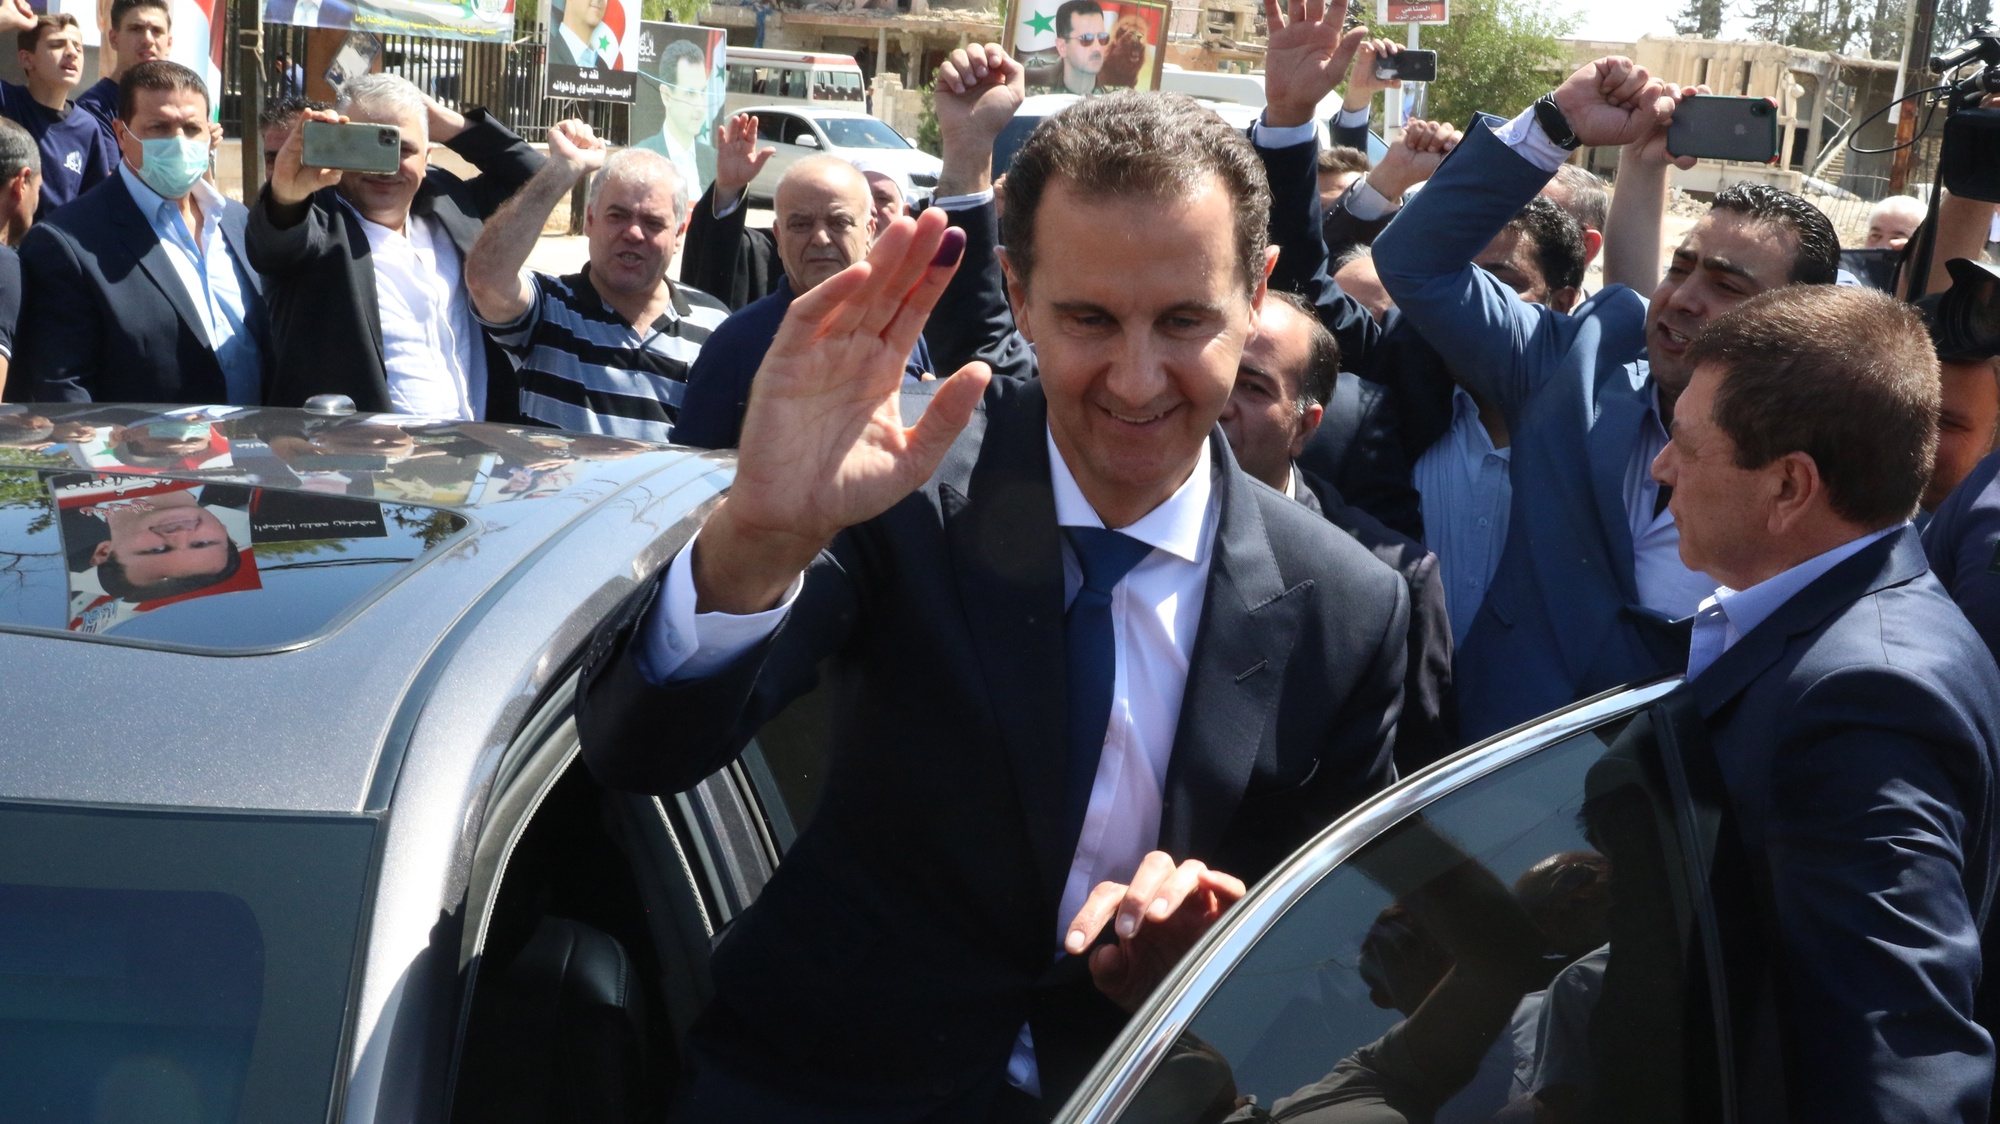 epa09623541 Syrian President Bashar al-Assad waves at supporters as he leaves a polling station in Duma city, Syria, 26 May 2021. The city was liberated by the Syrian army in 2018 after driving rebels out. Syrians will choose one out of three candidates, including Assad, for the post of President of the Syrian Arab Republic. The number of eligible voters registered inside and outside Syria has reached more than 18 million.  EPA/YOUSSEF BADAWI